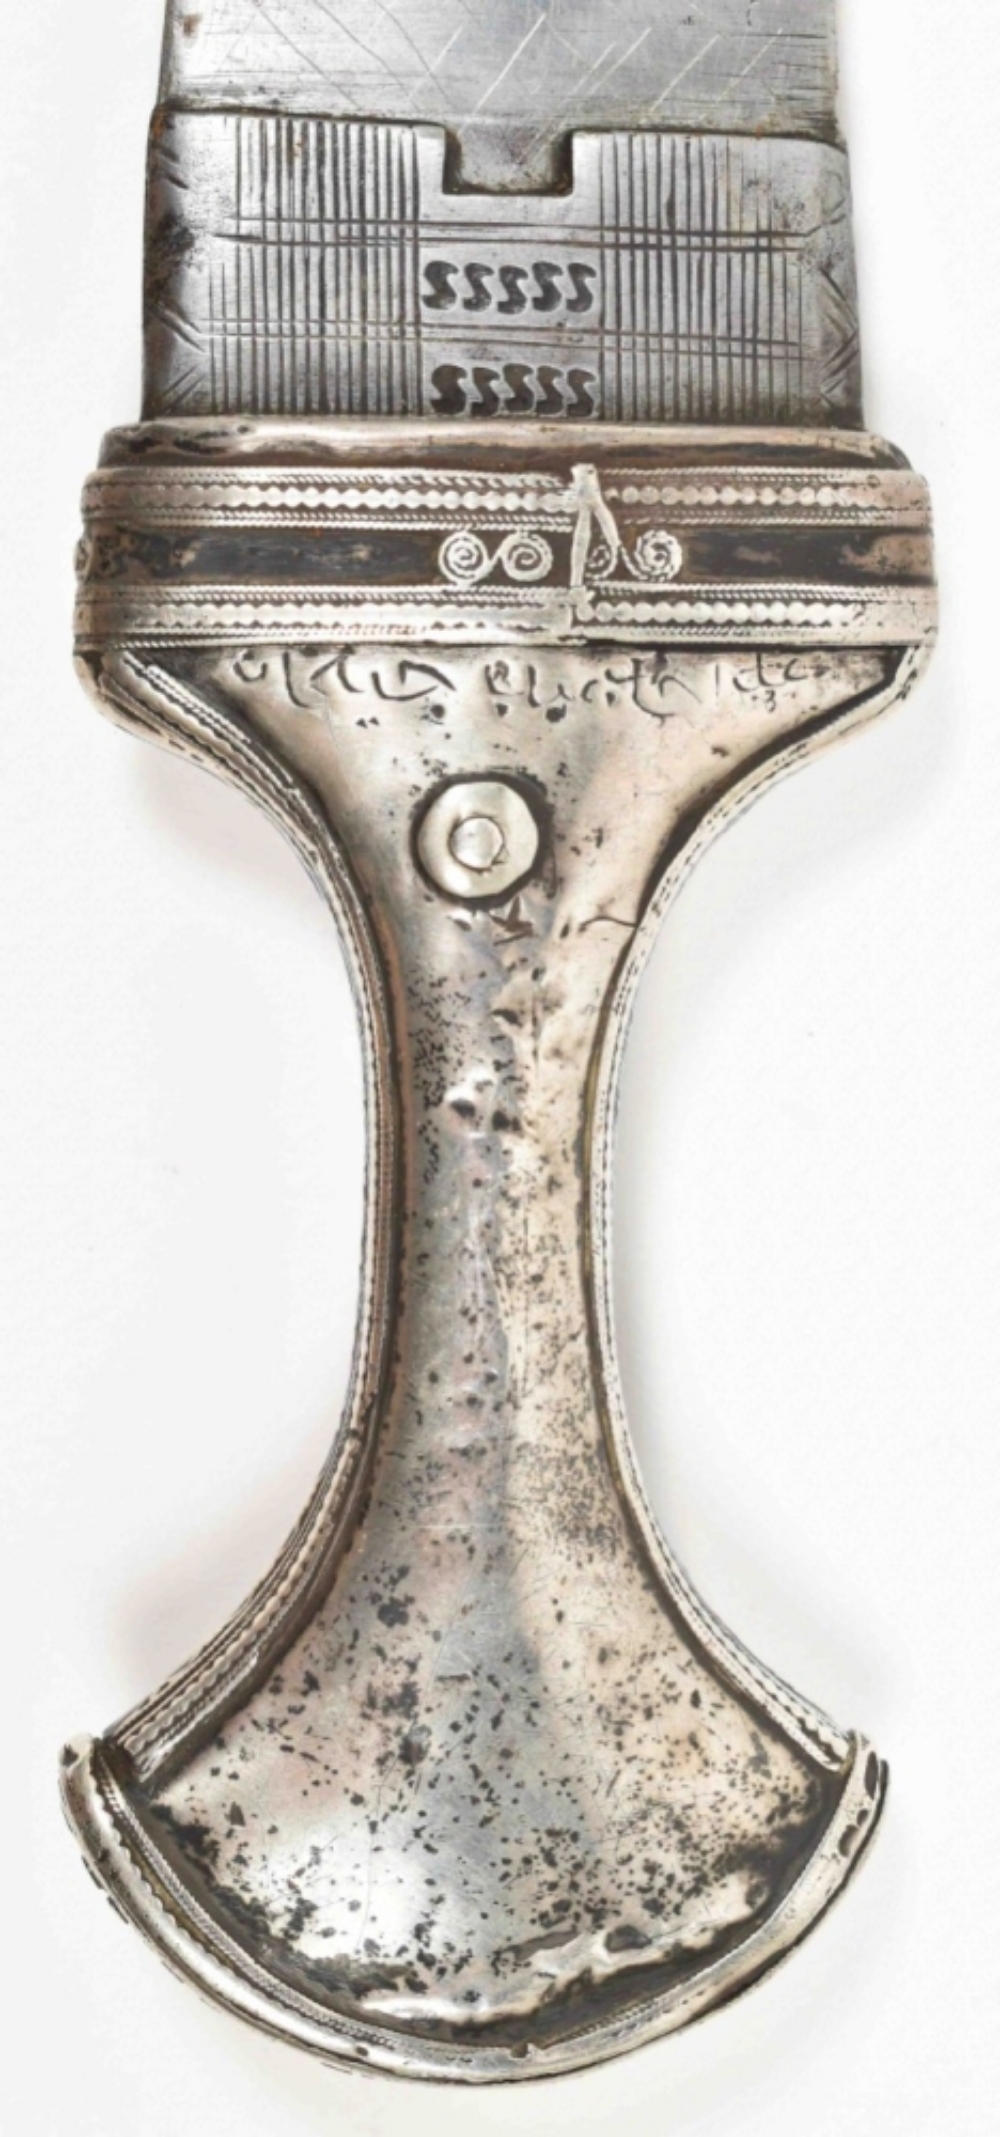 Early 20th cent. Ottoman sword - Image 5 of 7